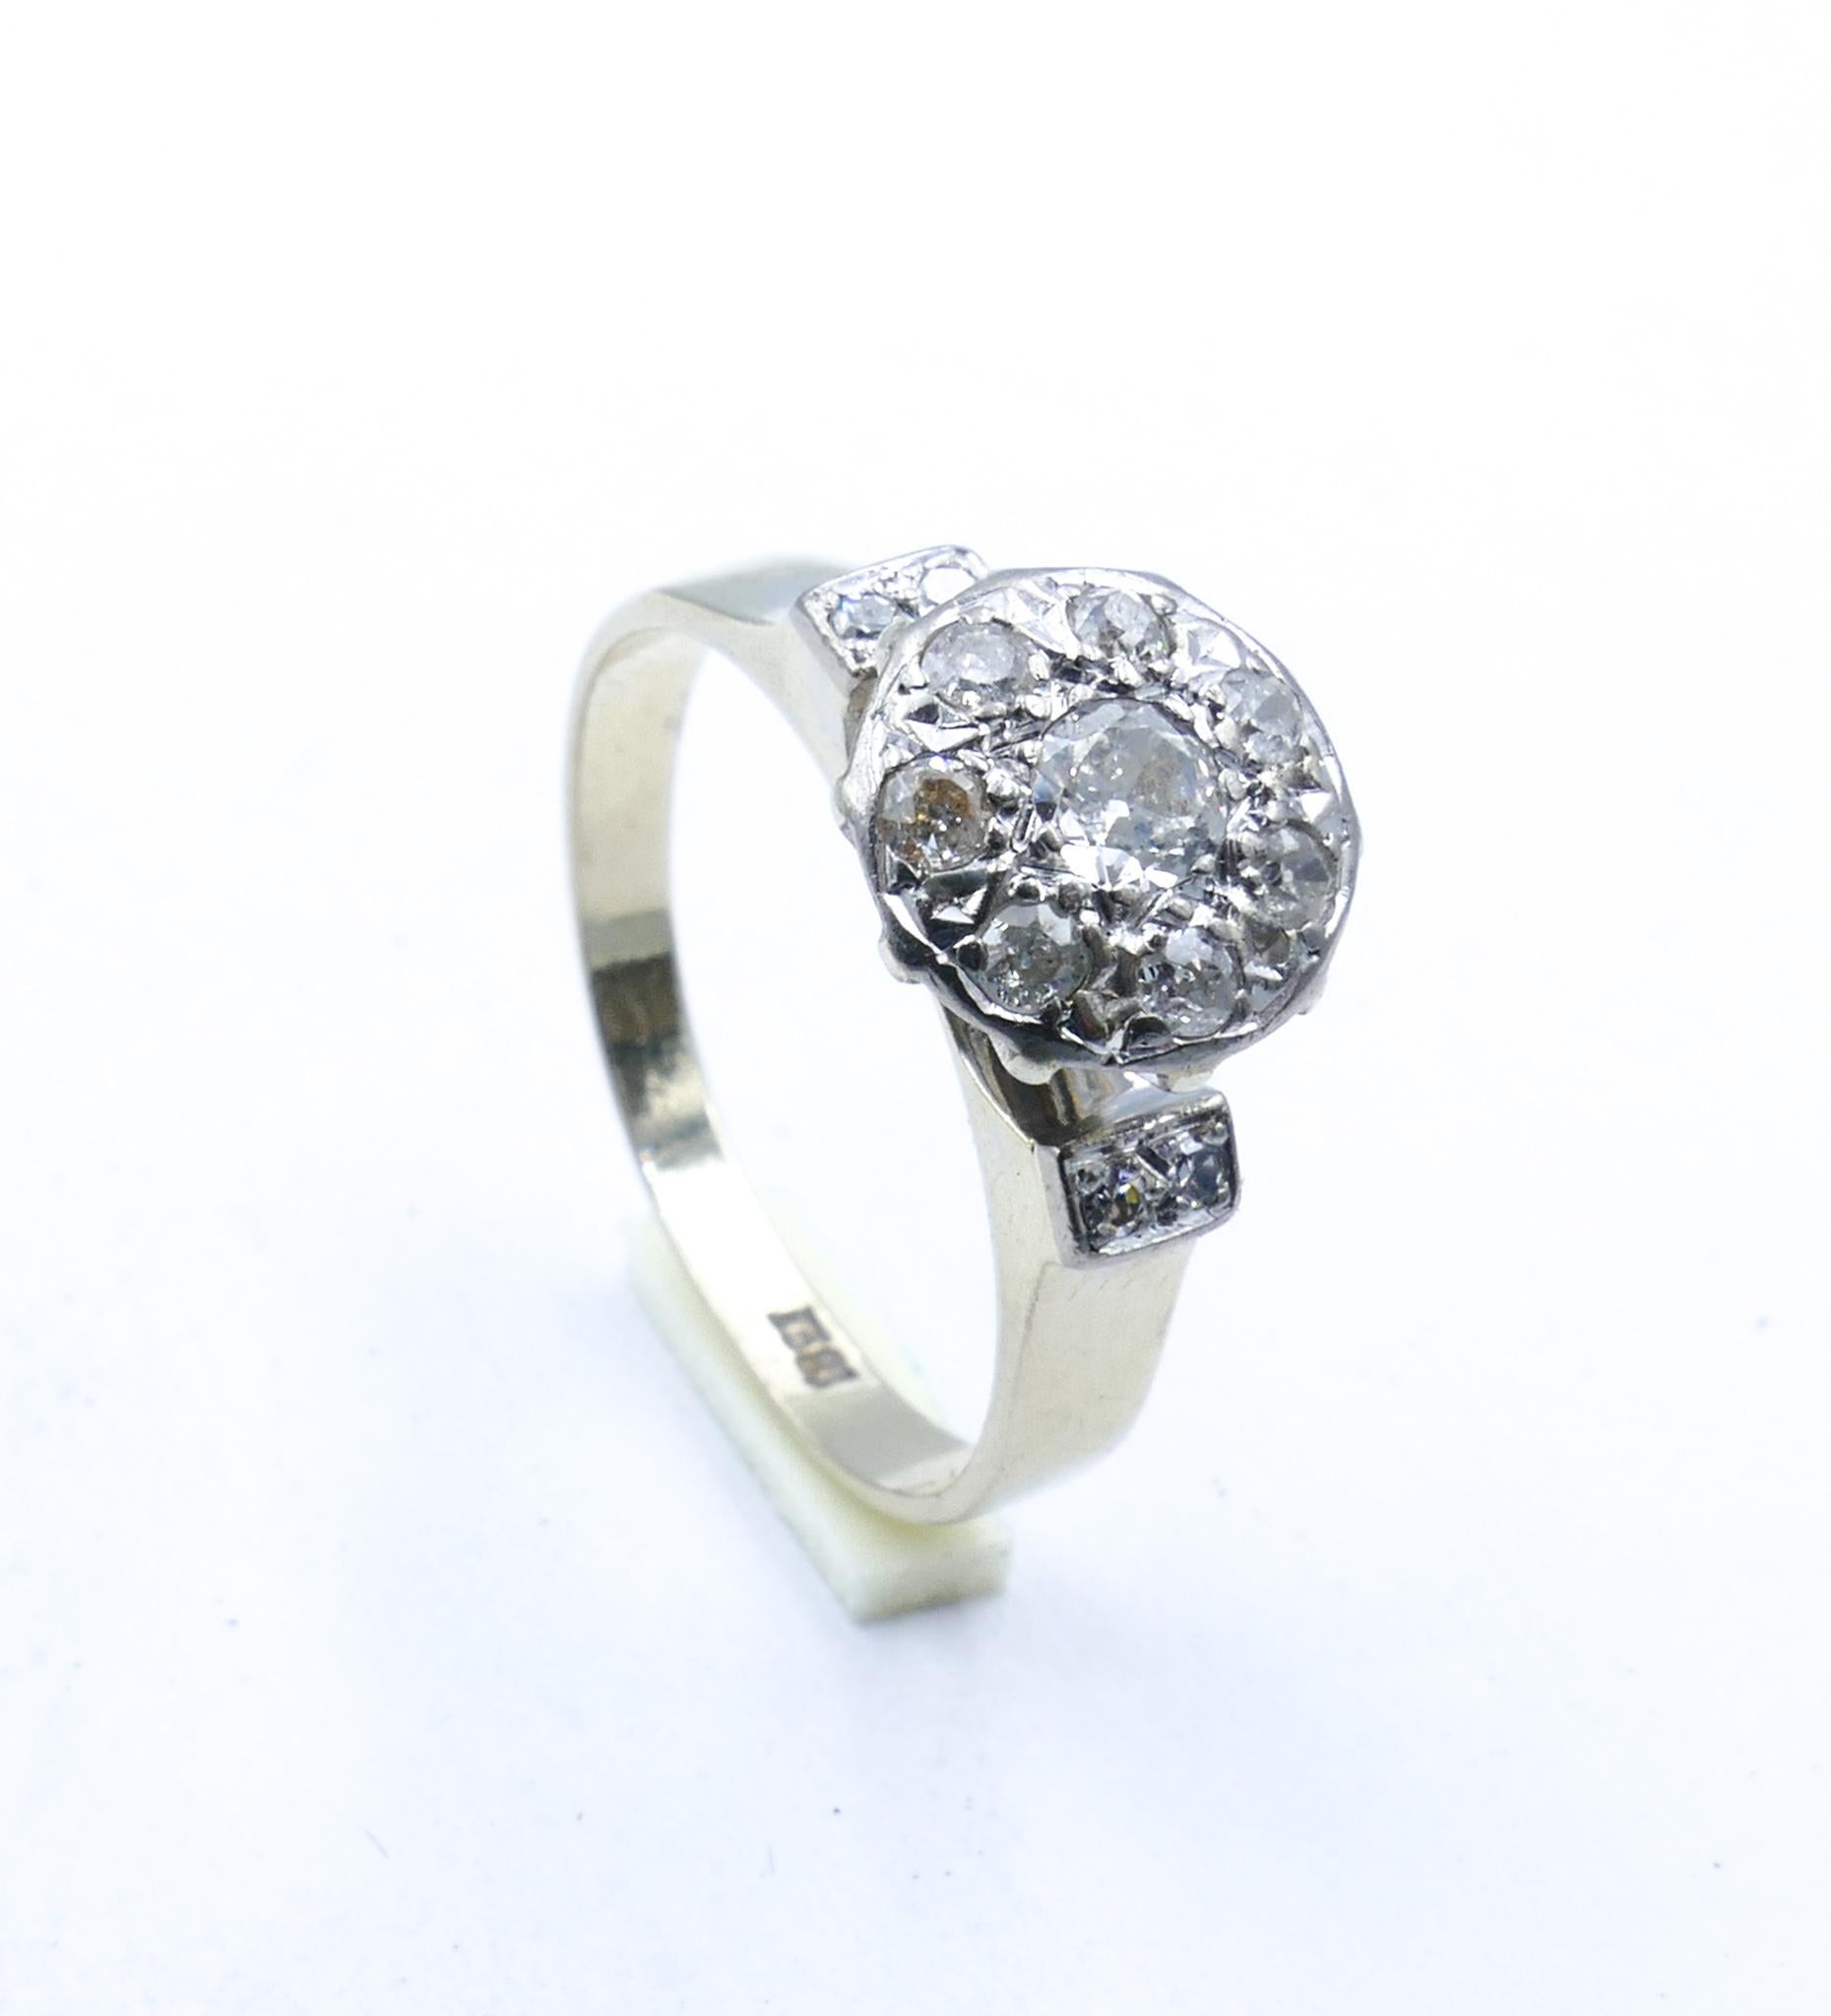 The central feature of this very pretty old Ring is a 0.20 carat round old cut 'G' grade Diamond.
Surrounding this are 7 round old cut Diamonds with an extra 4 single cut Diamonds set into the shoulders of the Ring which then settles into quite a